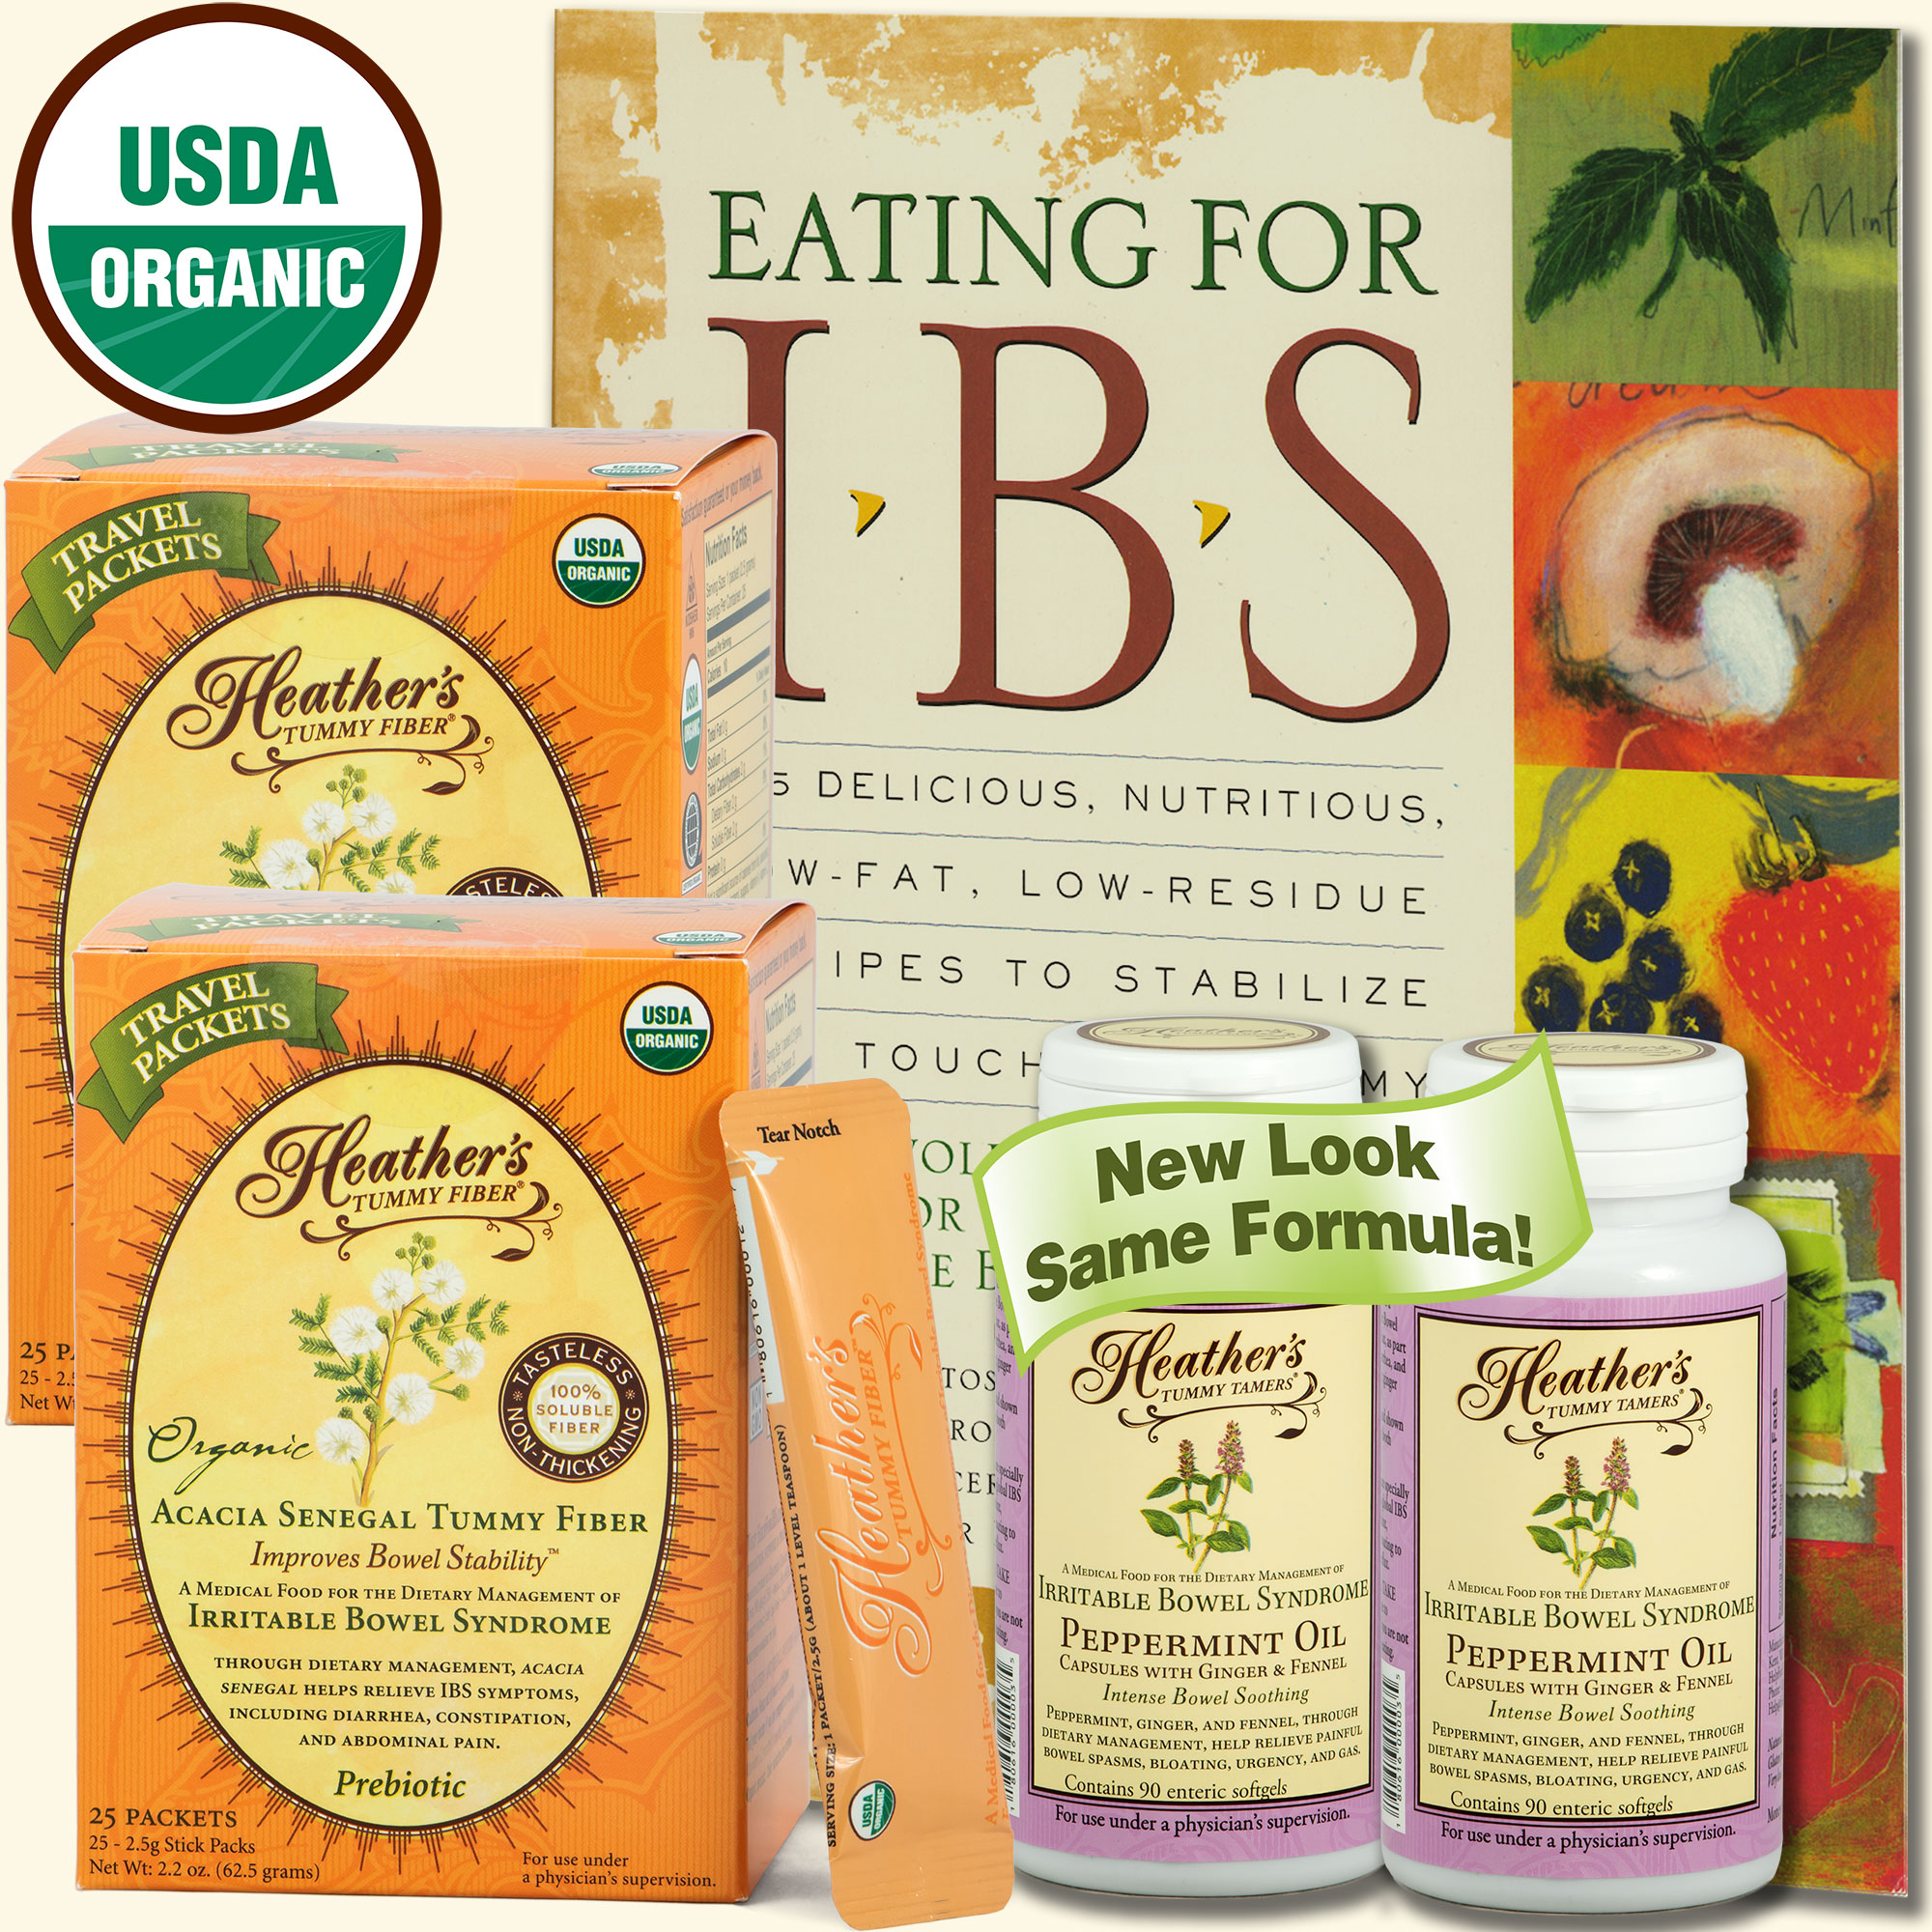 IBS Diet Kit #2:<br>Eating for IBS,<BR>Tummy Fiber Acacia,<BR>Tummy Tamers Peppermint Caps